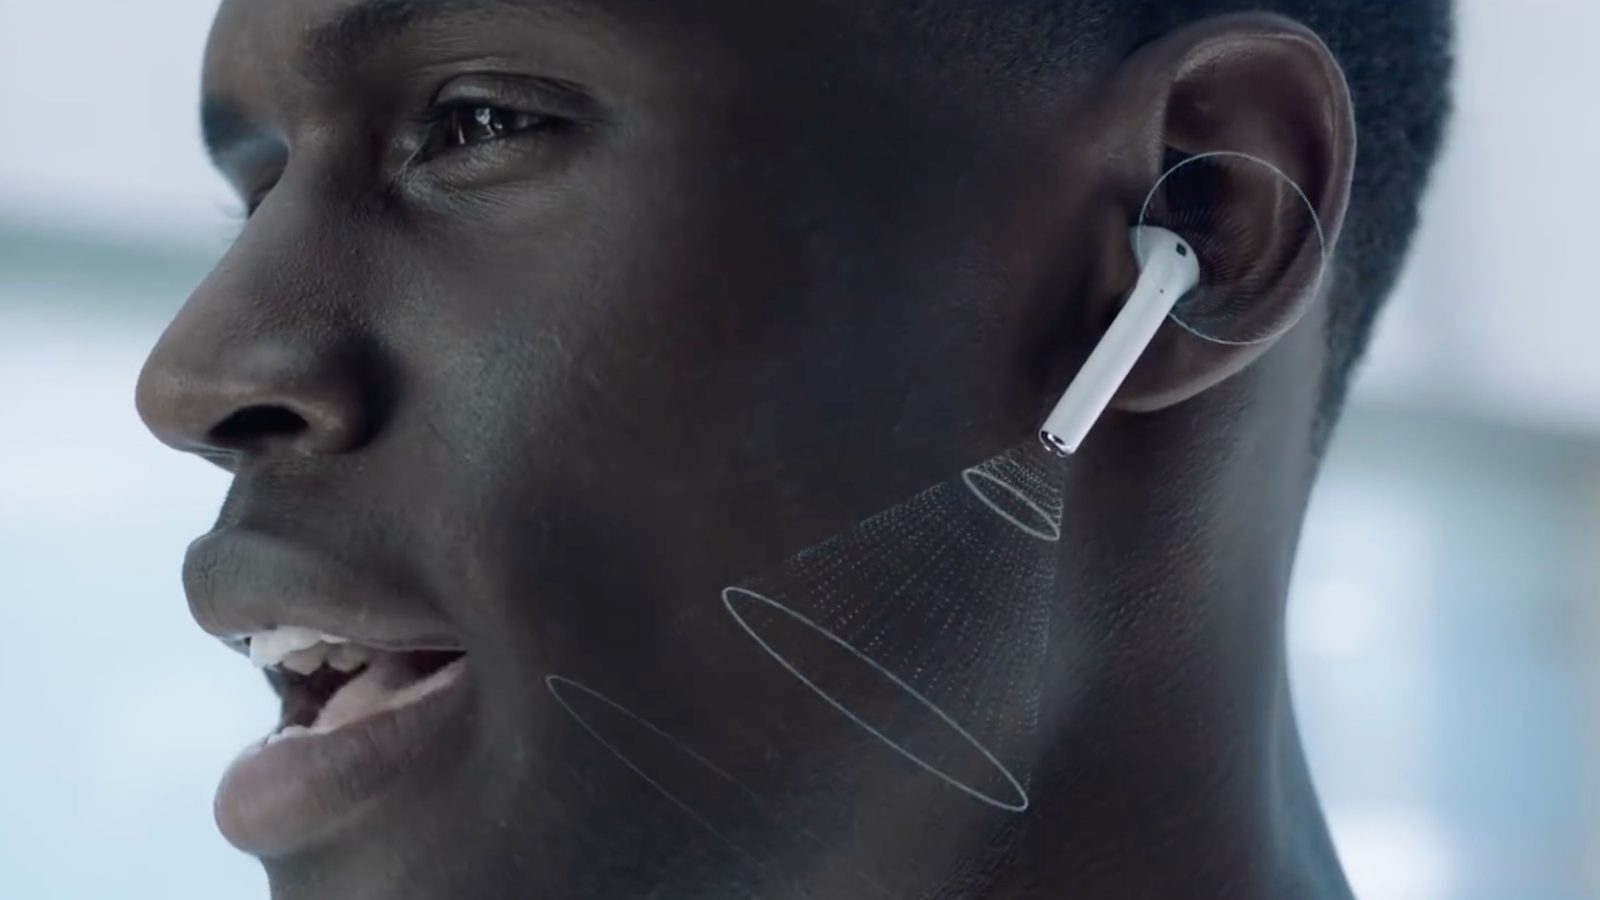 photo of Rumor: AirPods 2 with specialized grip coating and AirPower launching this Spring image